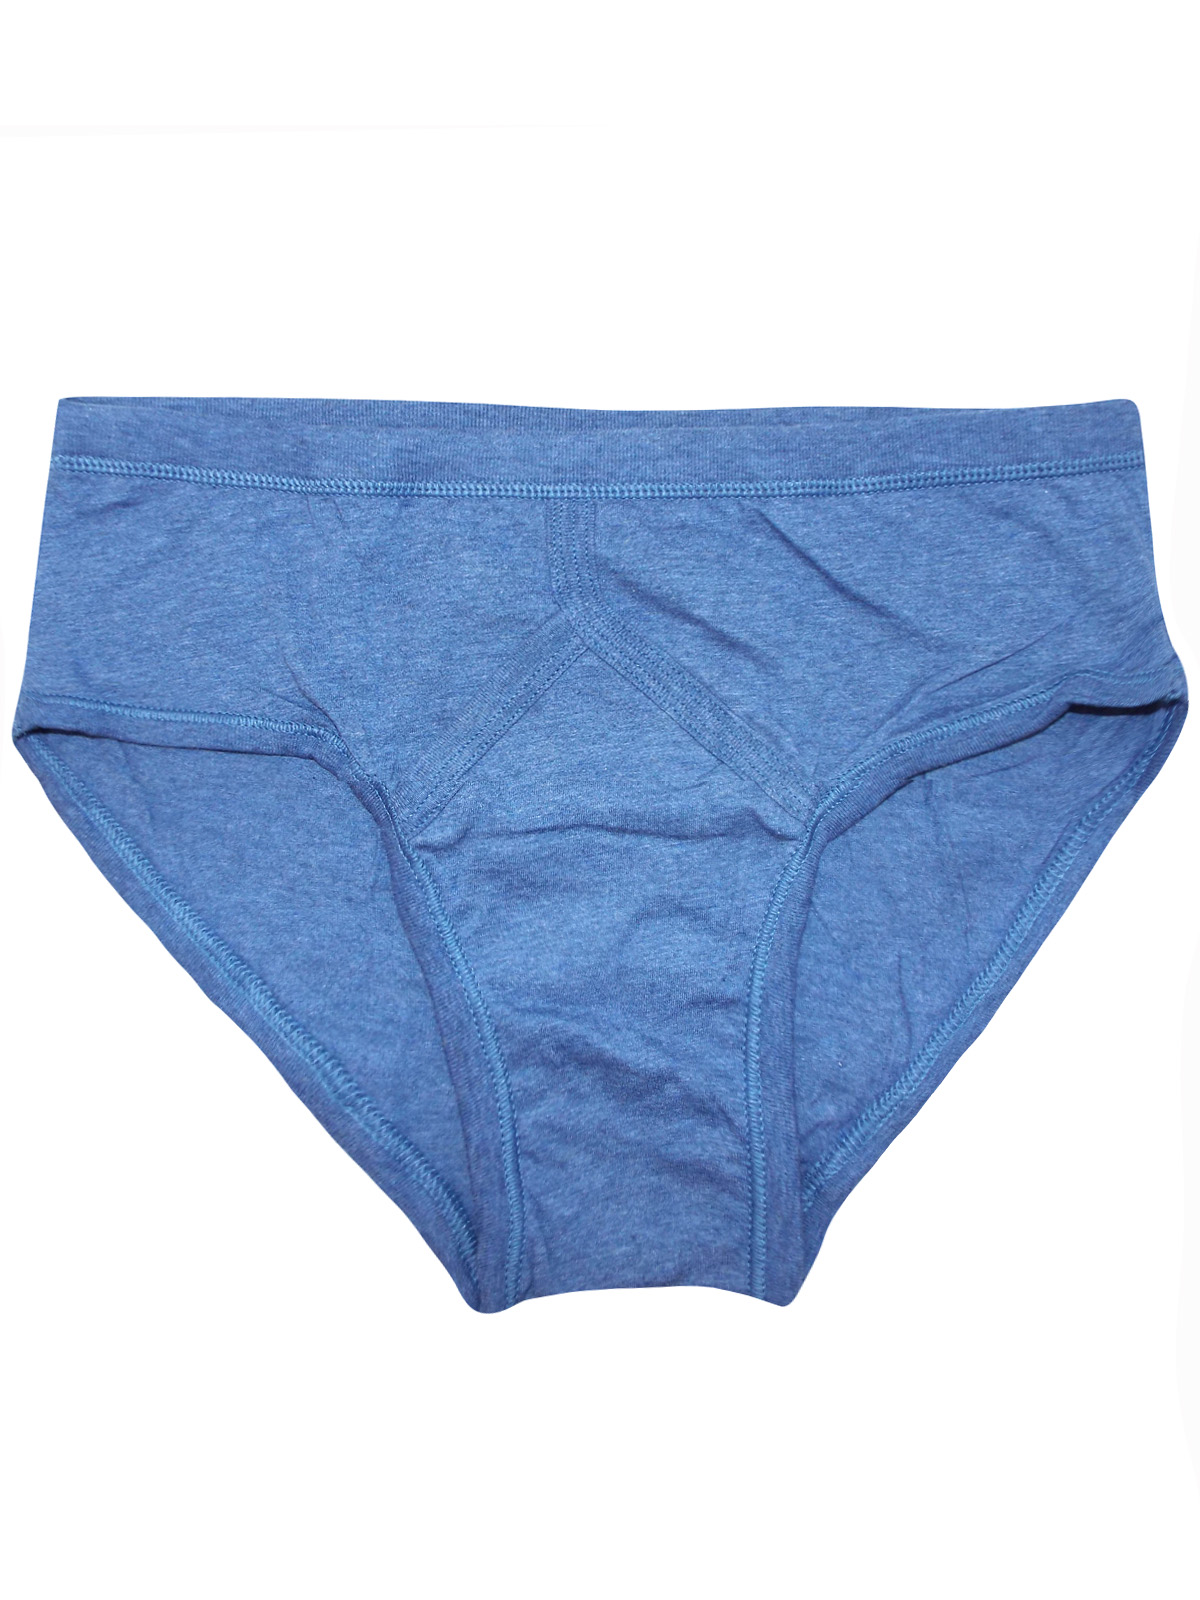 Marks and Spencer - - M&5 BLUE Mens Pure Cotton Classic Briefs - Size